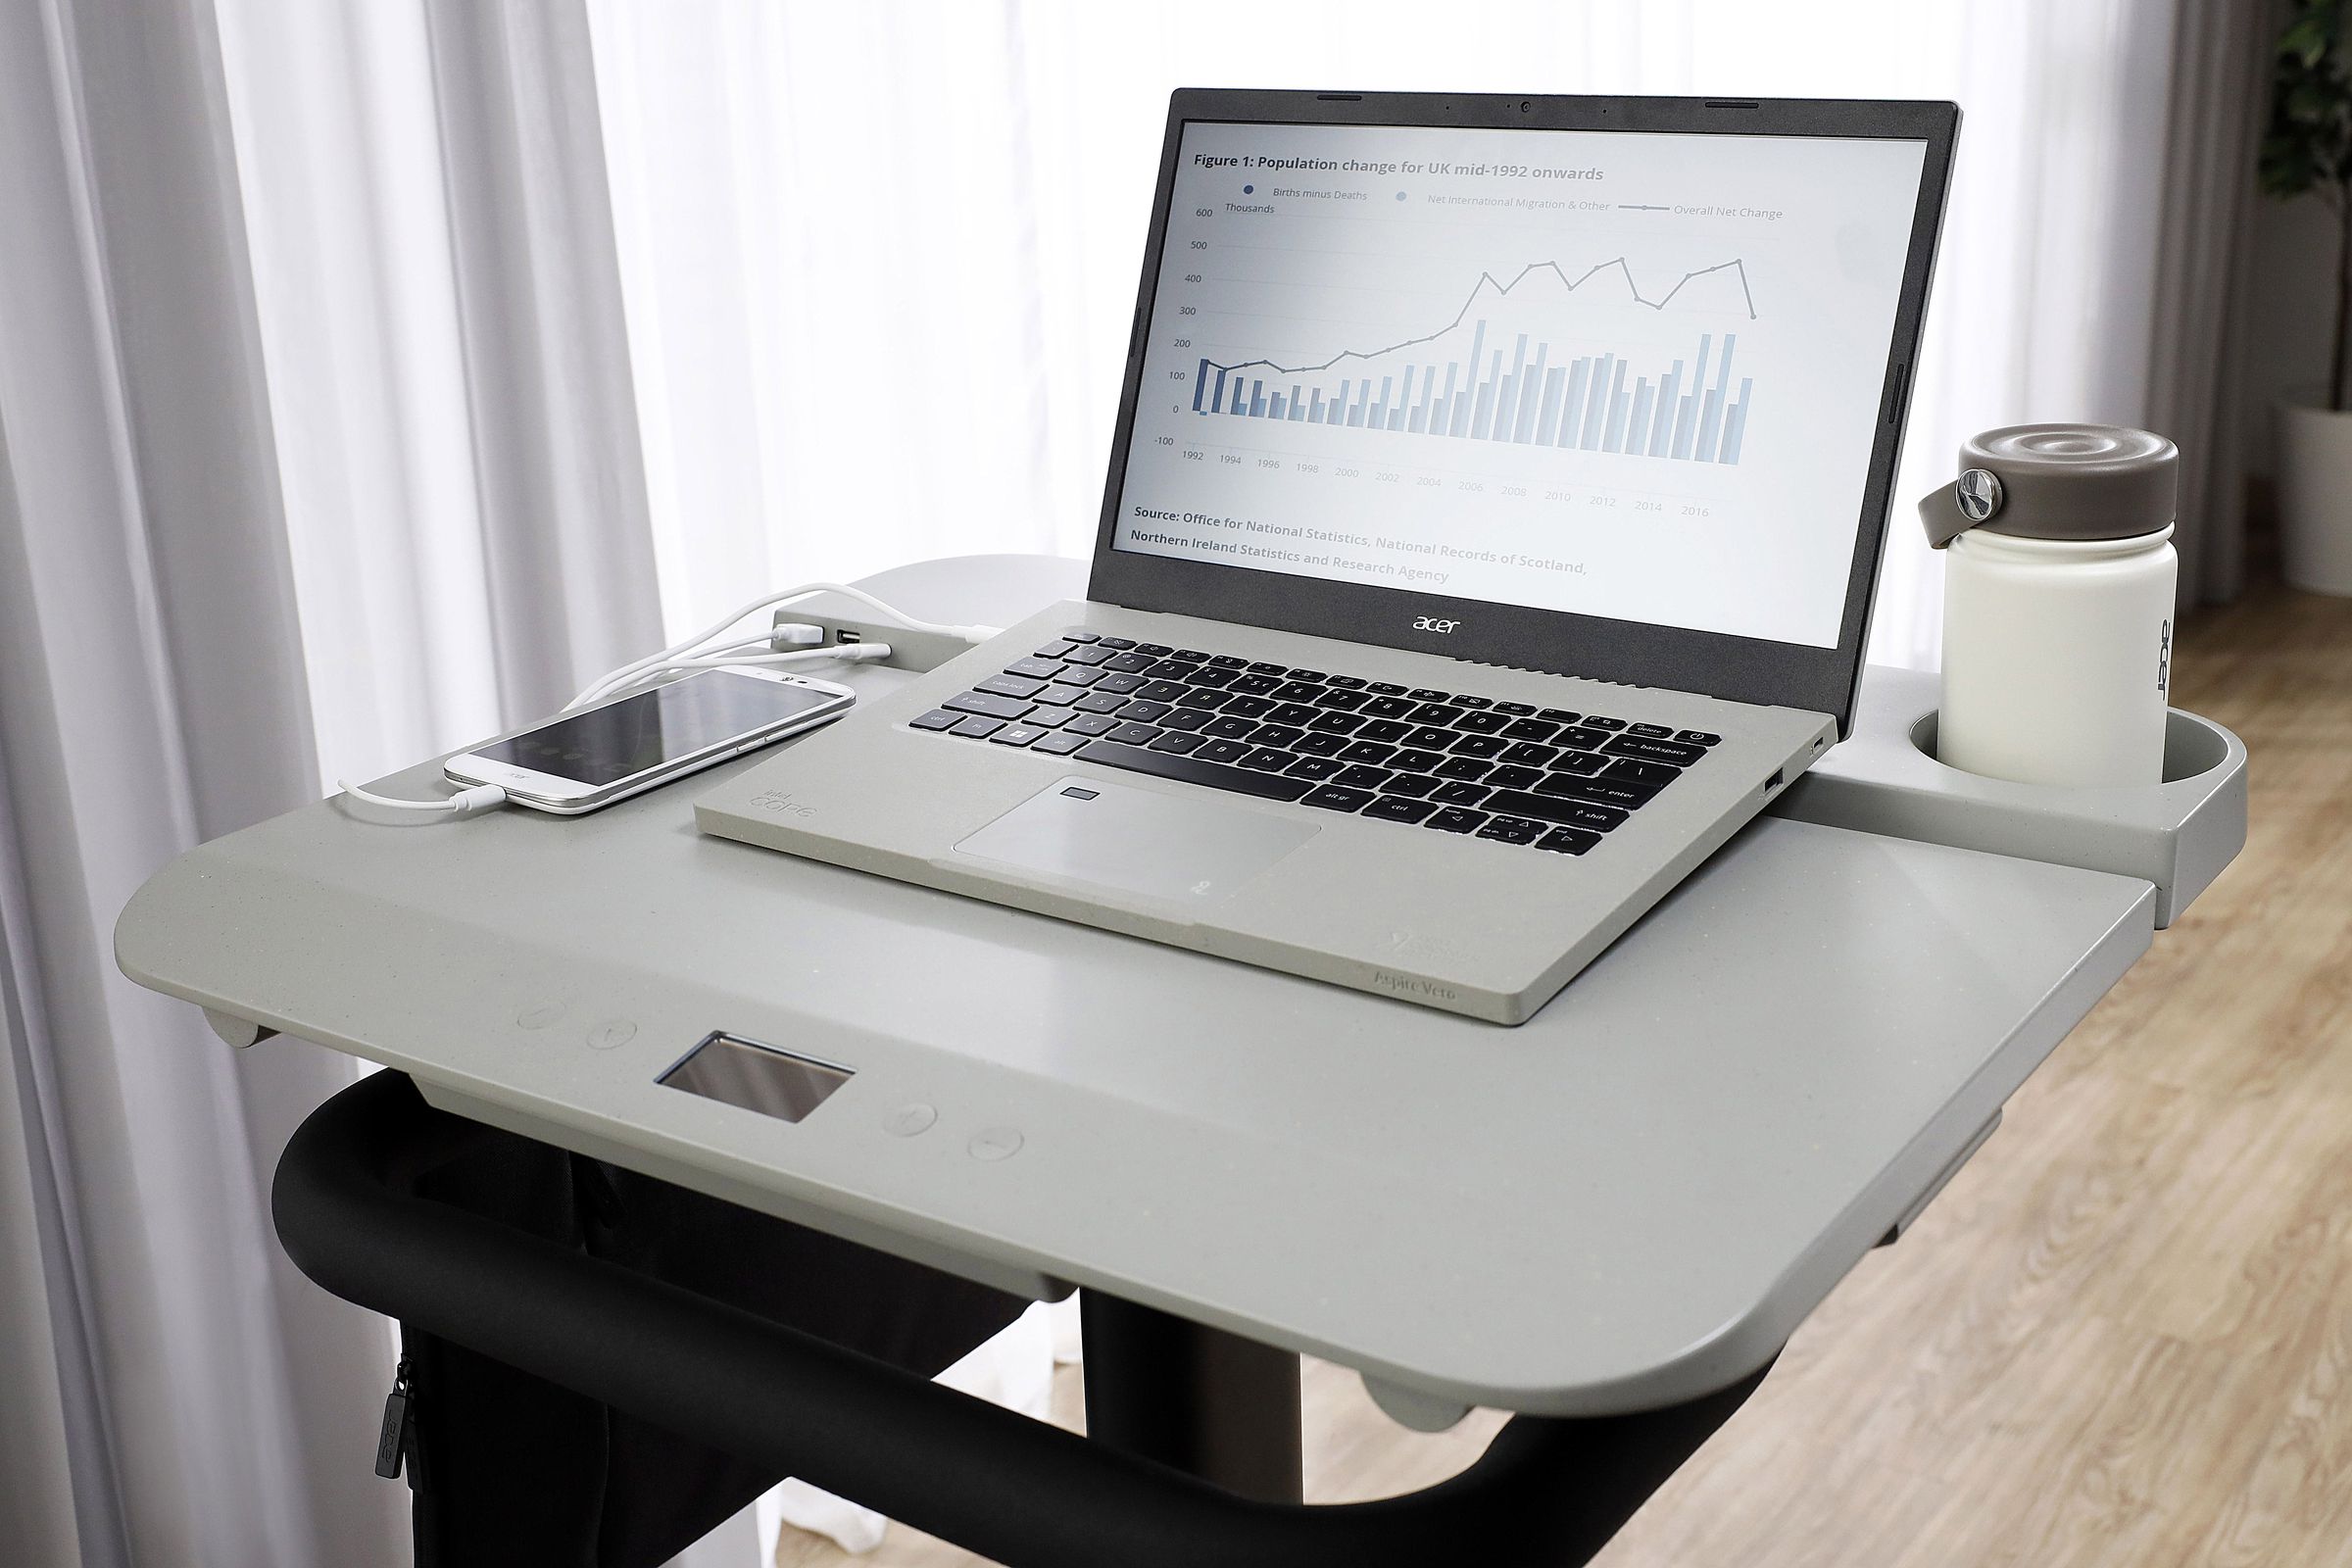 The desktop of the Acer eKinekt BD 3 bicycle desk, with a laptop, telephone, mug and a portable power bank on it.